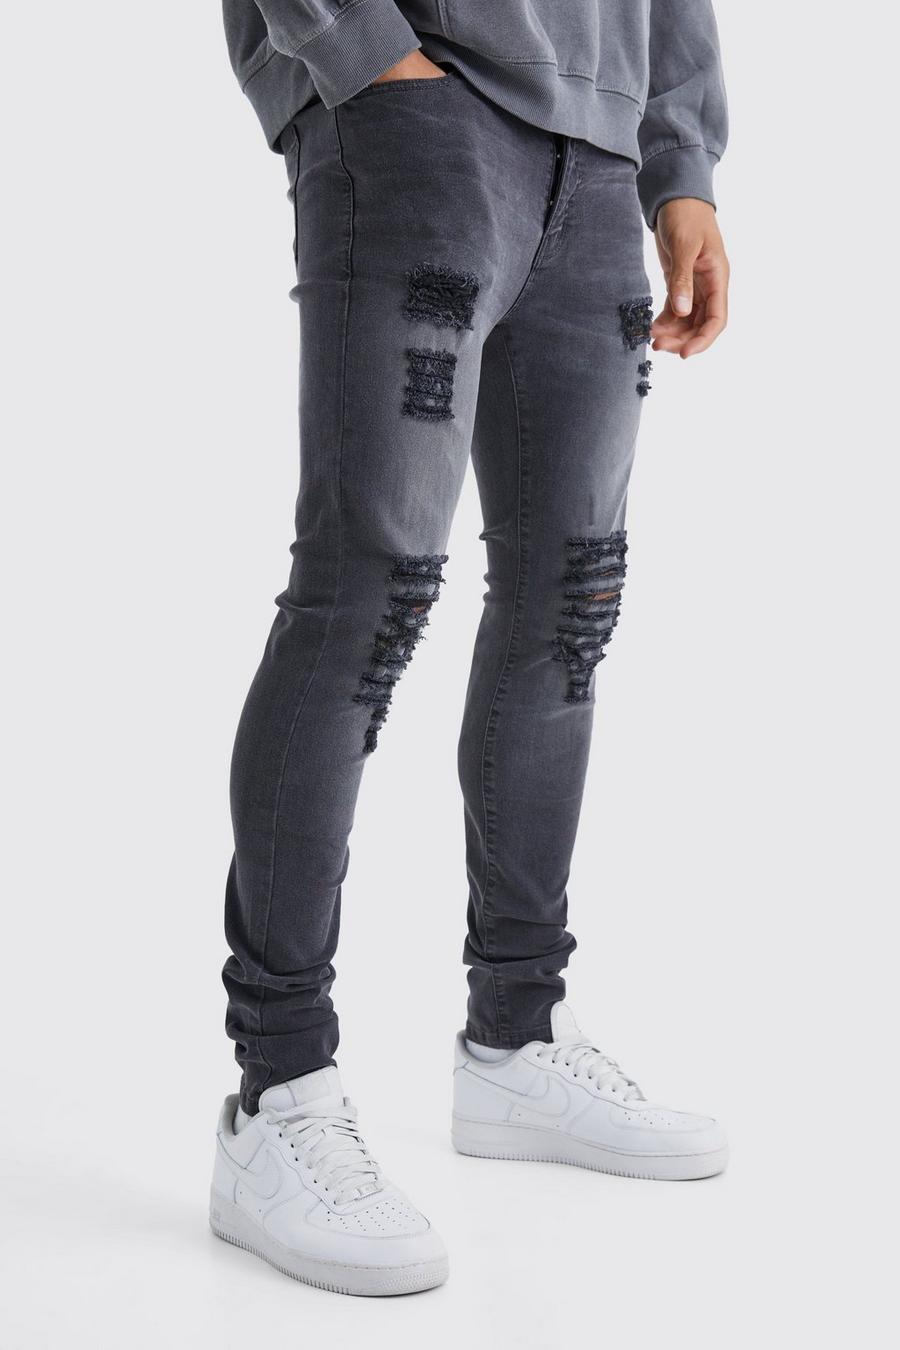 Jeans Tall Skinny Fit con strappi all over, Charcoal